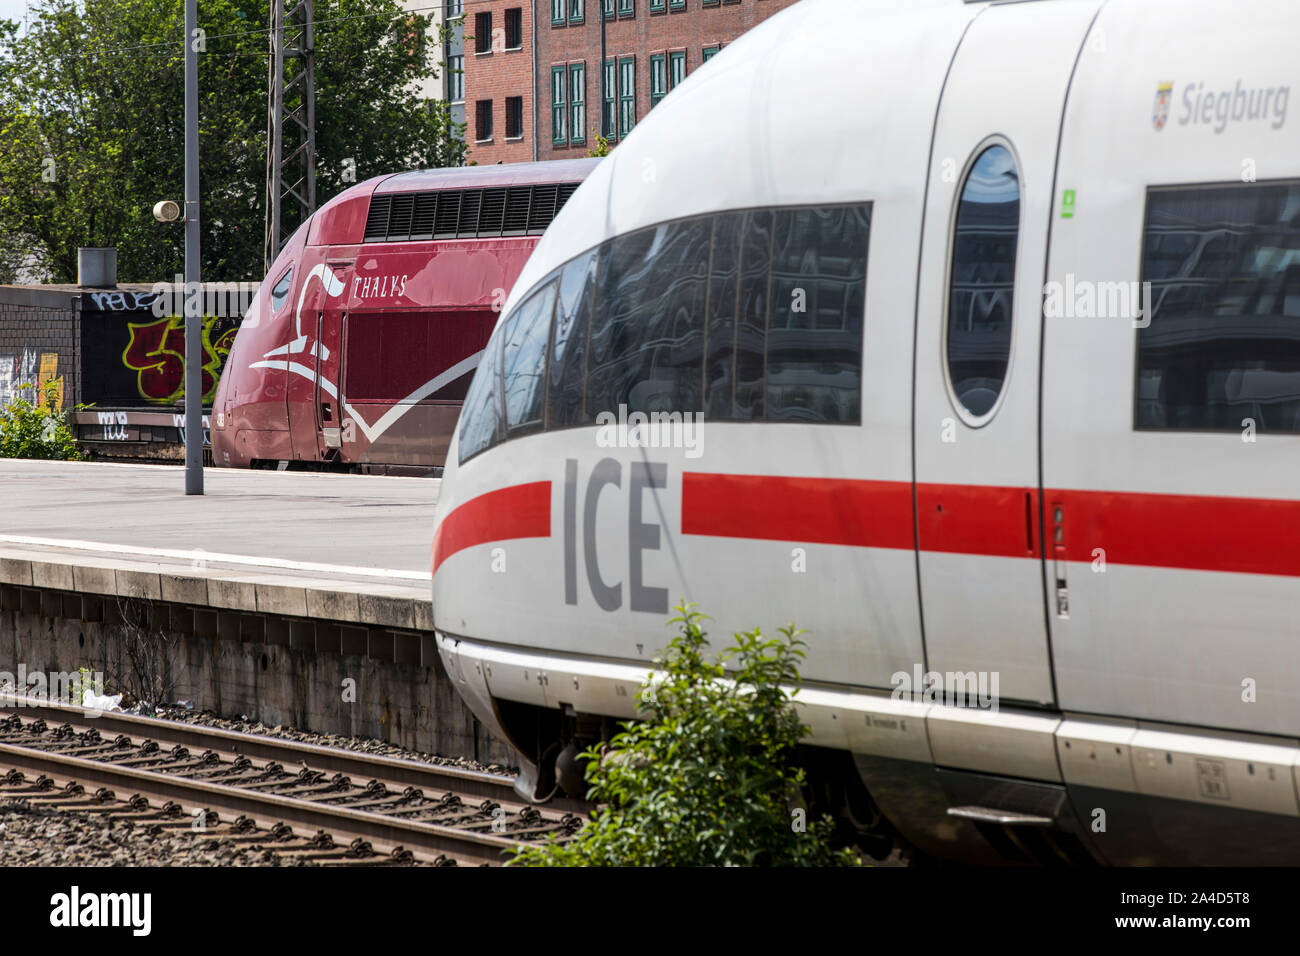 Express trains, ICE train and the French Thalys train at Essen main station, Germany, Stock Photo